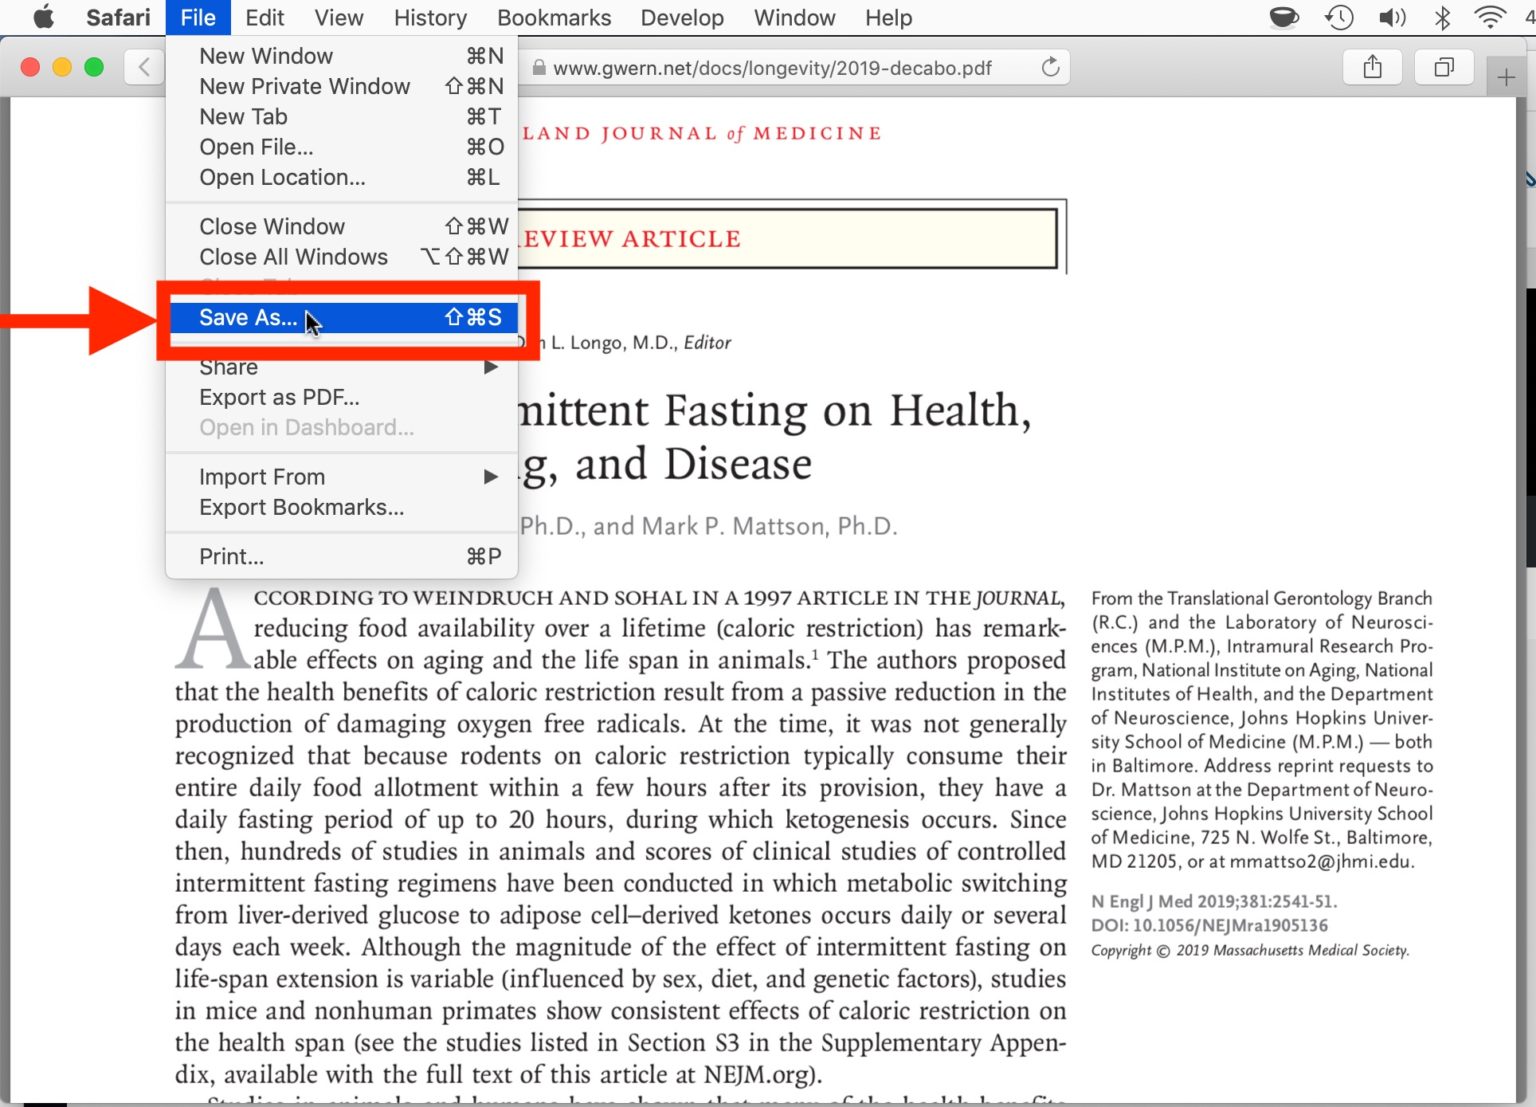 how to download pdf from safari on mac